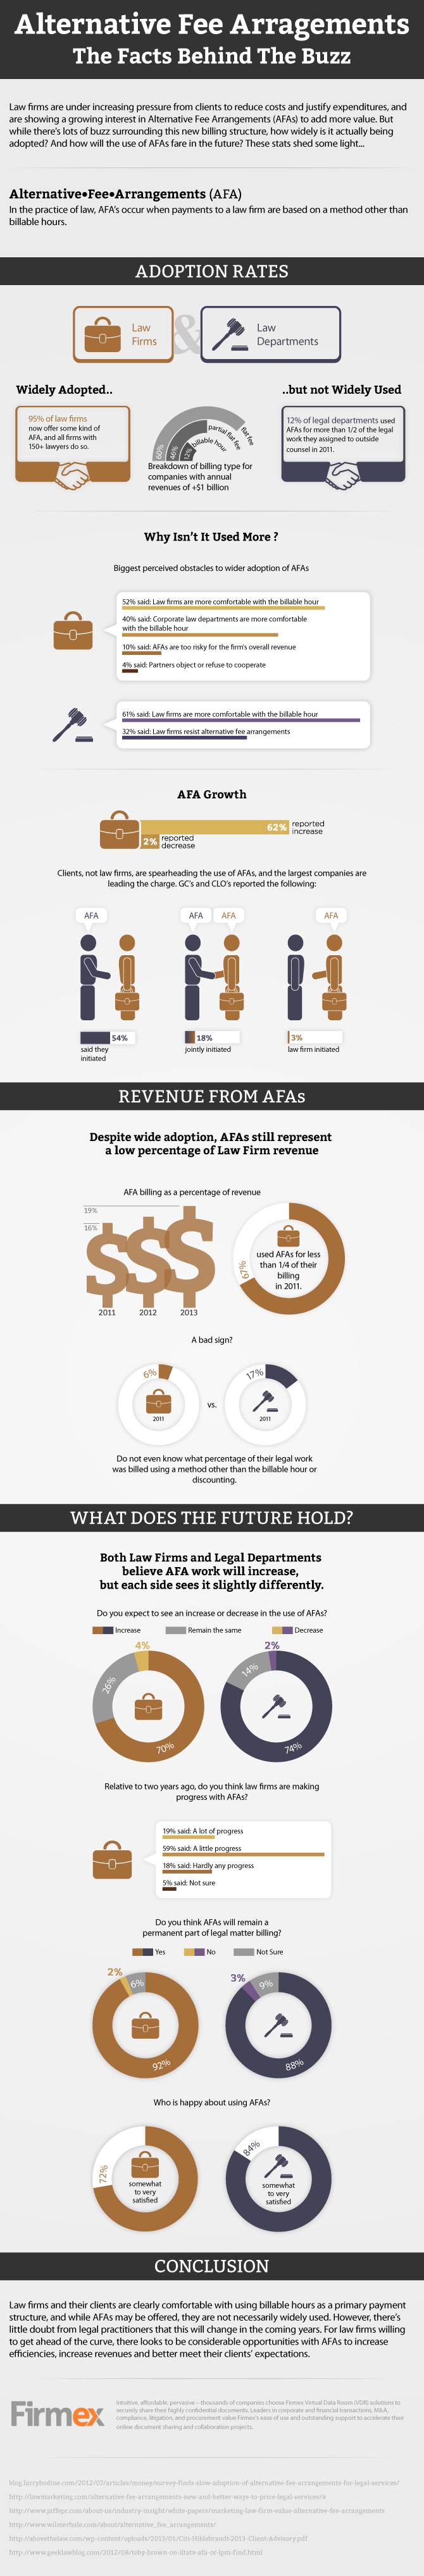 Alternative fee arrangements (AFAs) - Facts behind the Buzz  Infographic